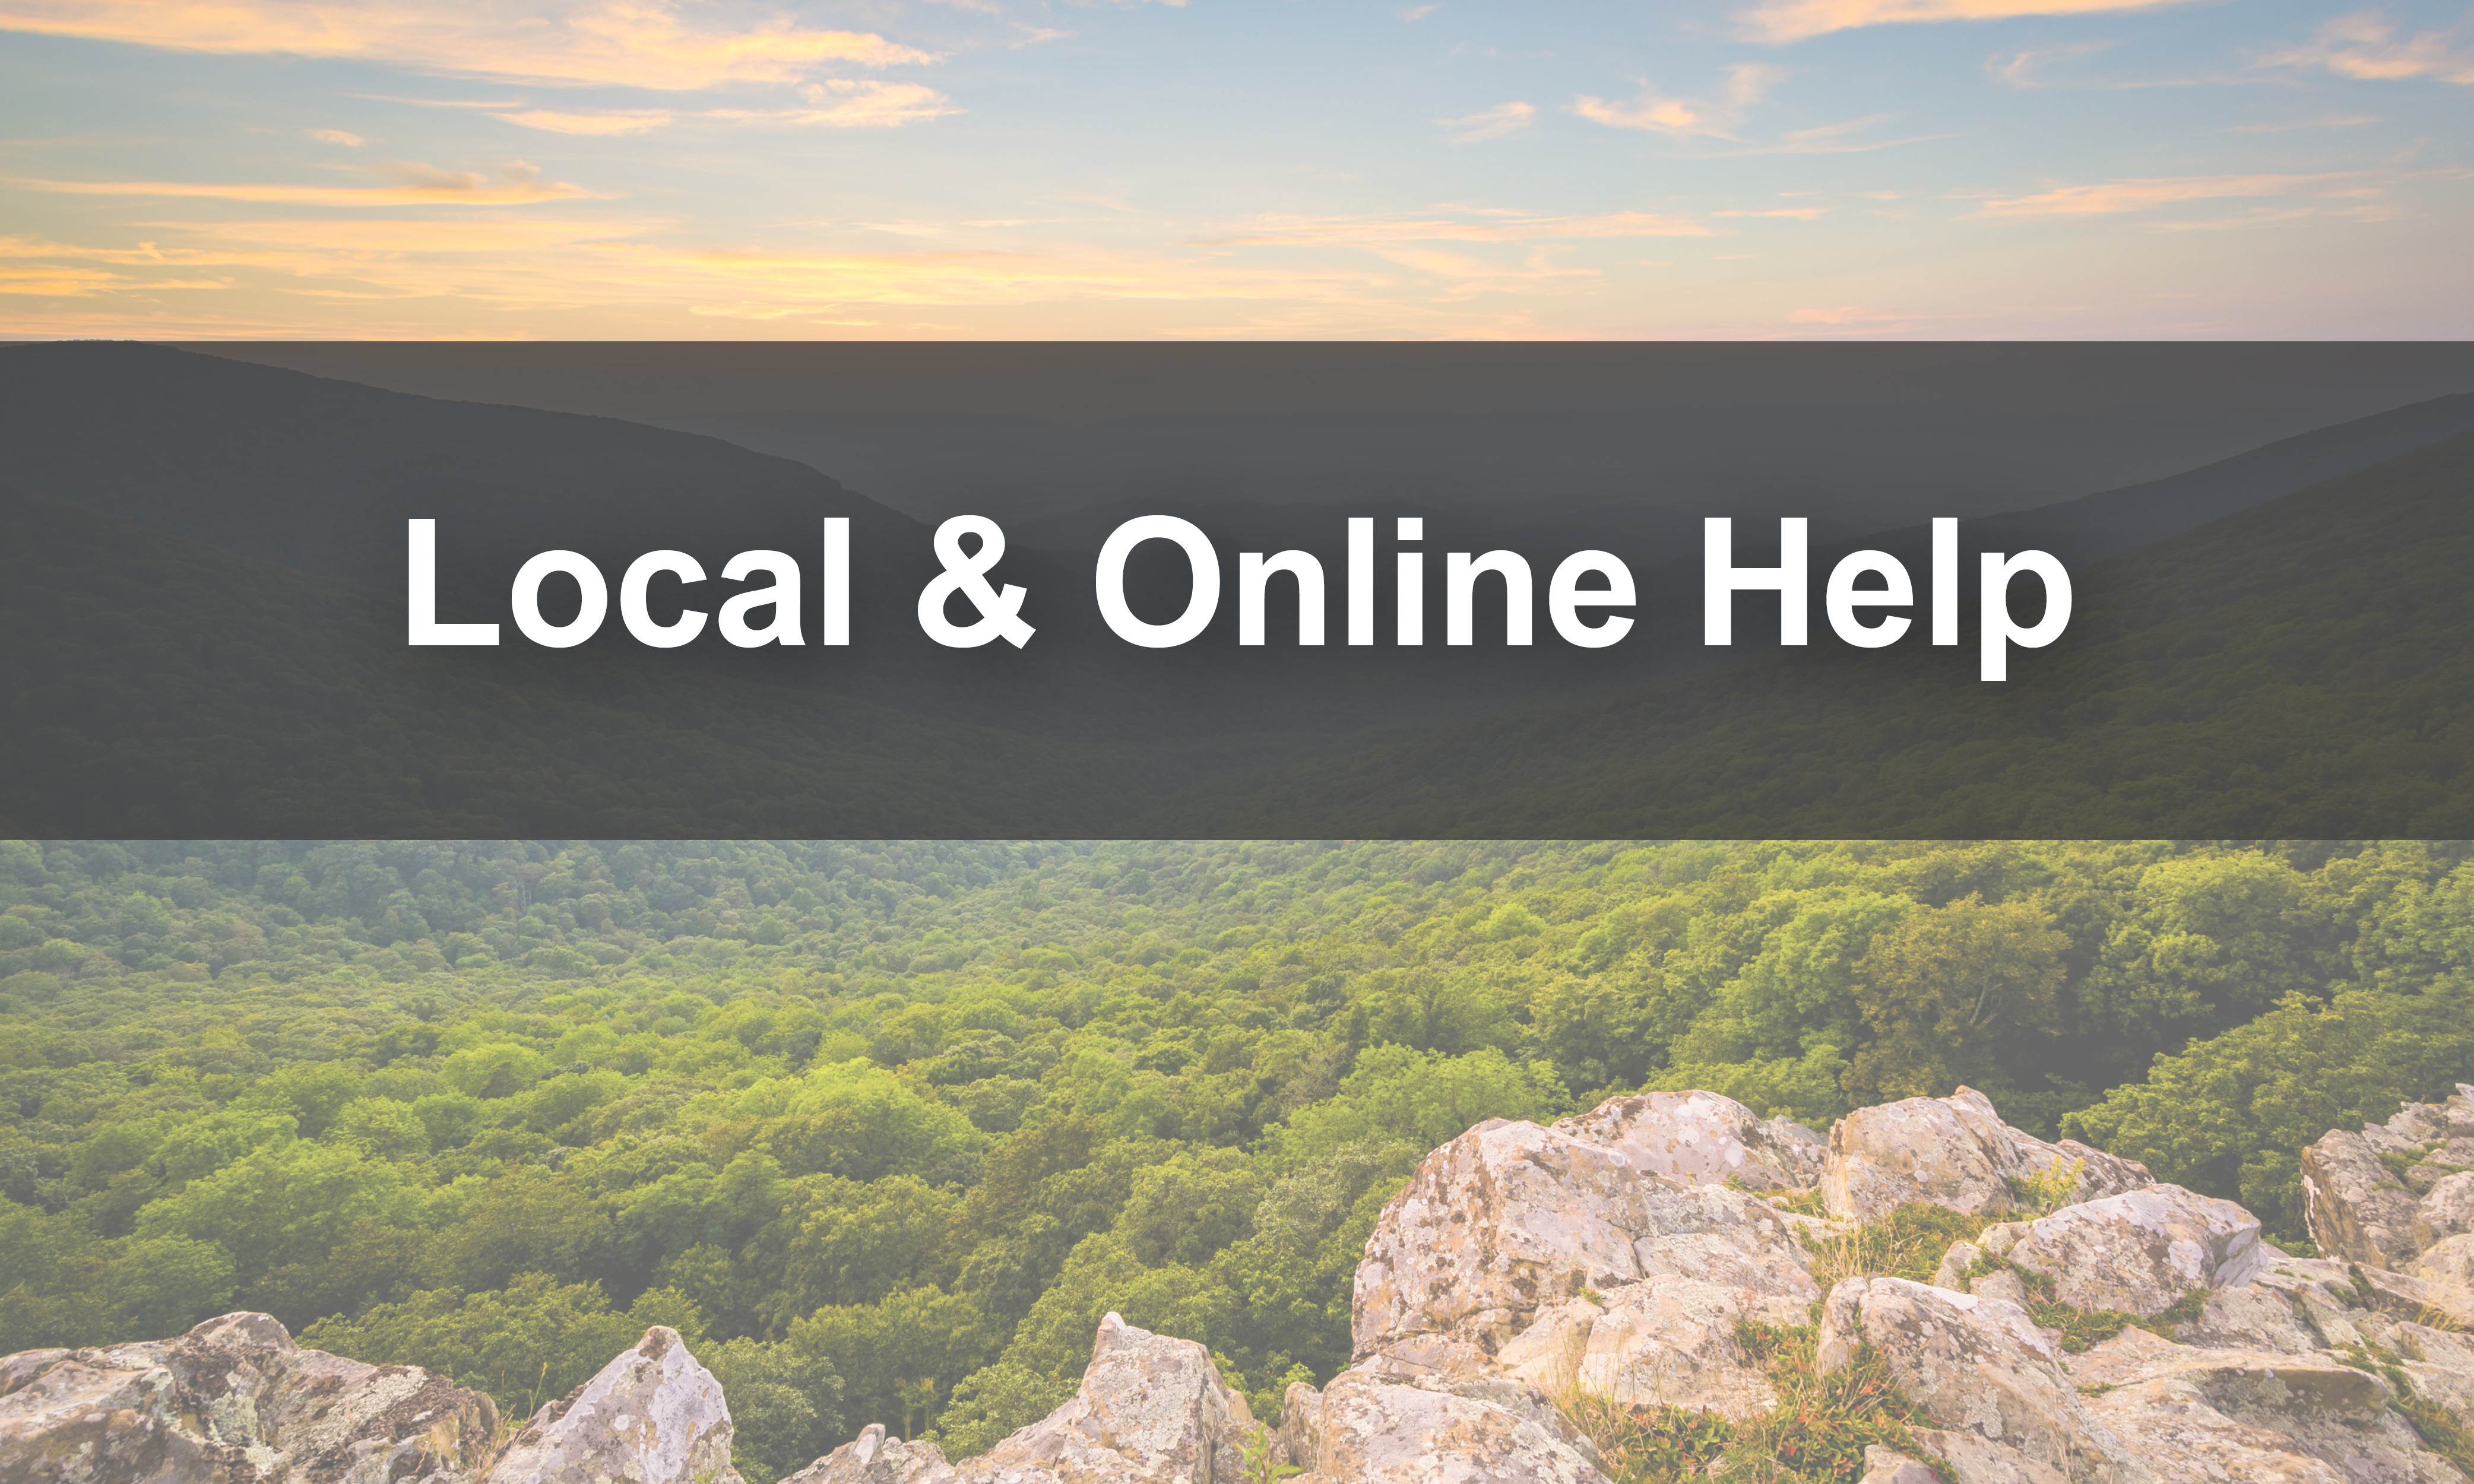 Link to local and online hlep resources